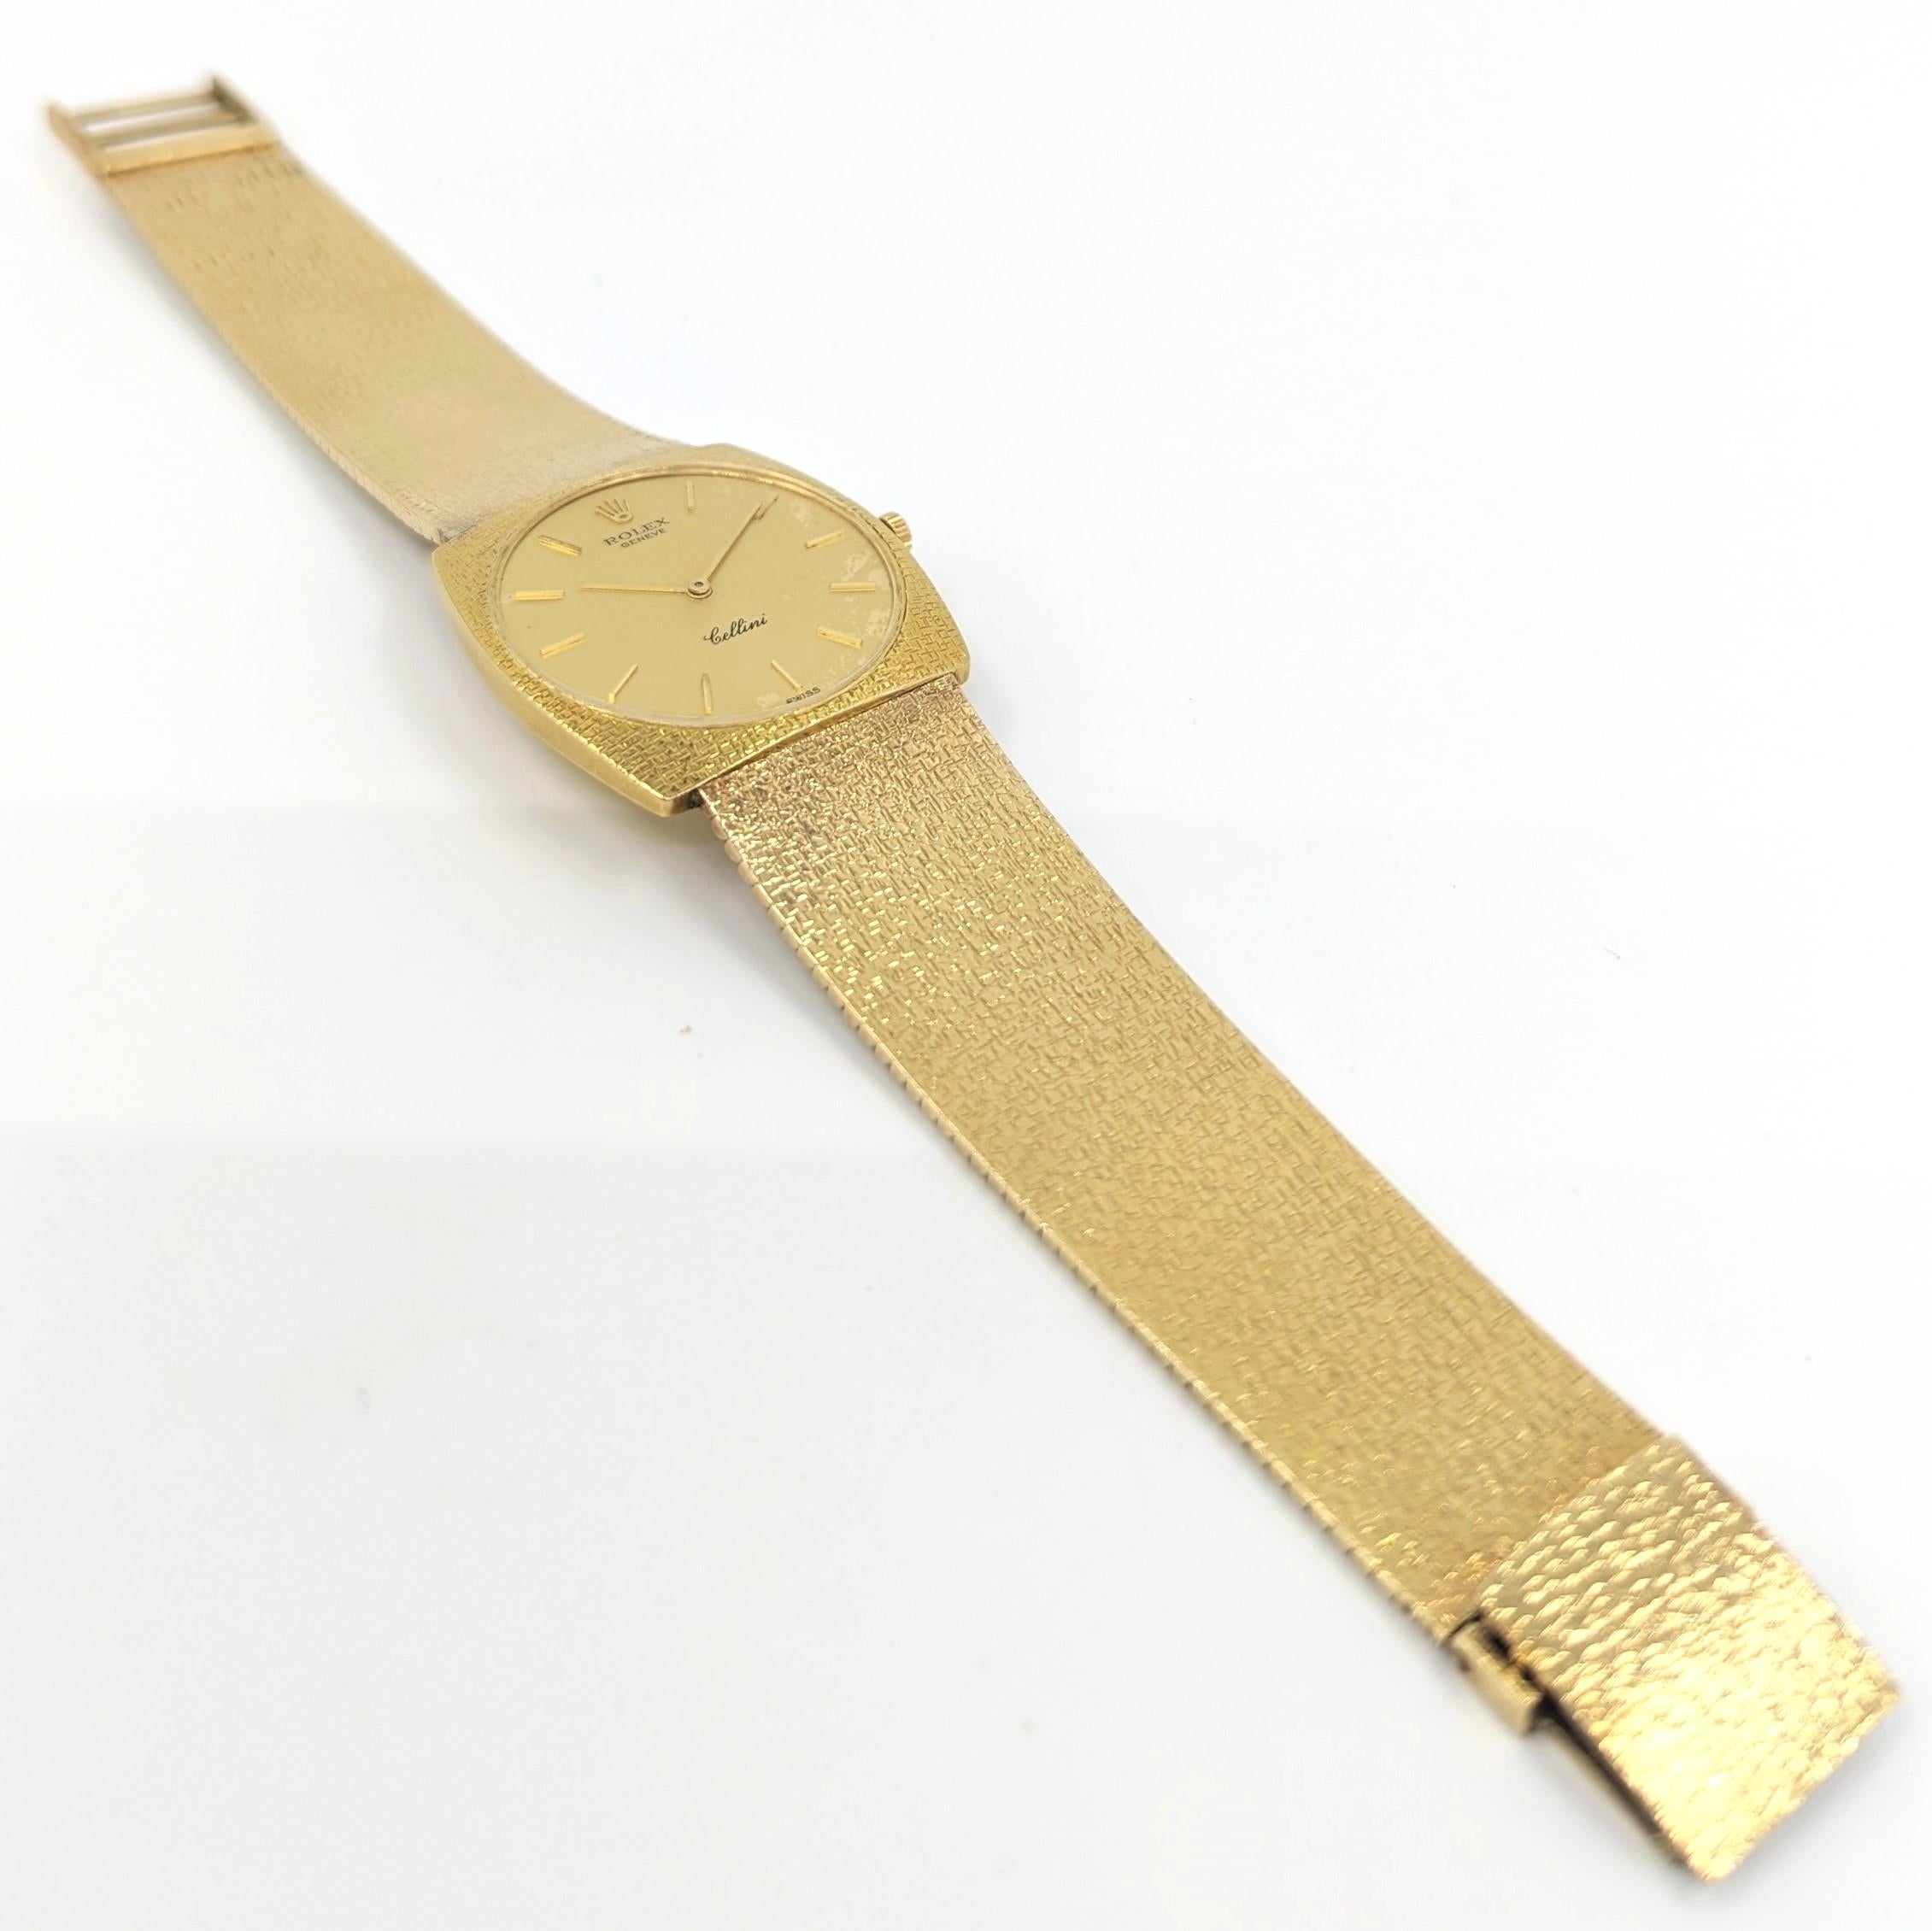 Gent's Vintage Rolex Cellini Bracelet Watch in Solid 18k Yellow Gold Ref. 3800 For Sale 1